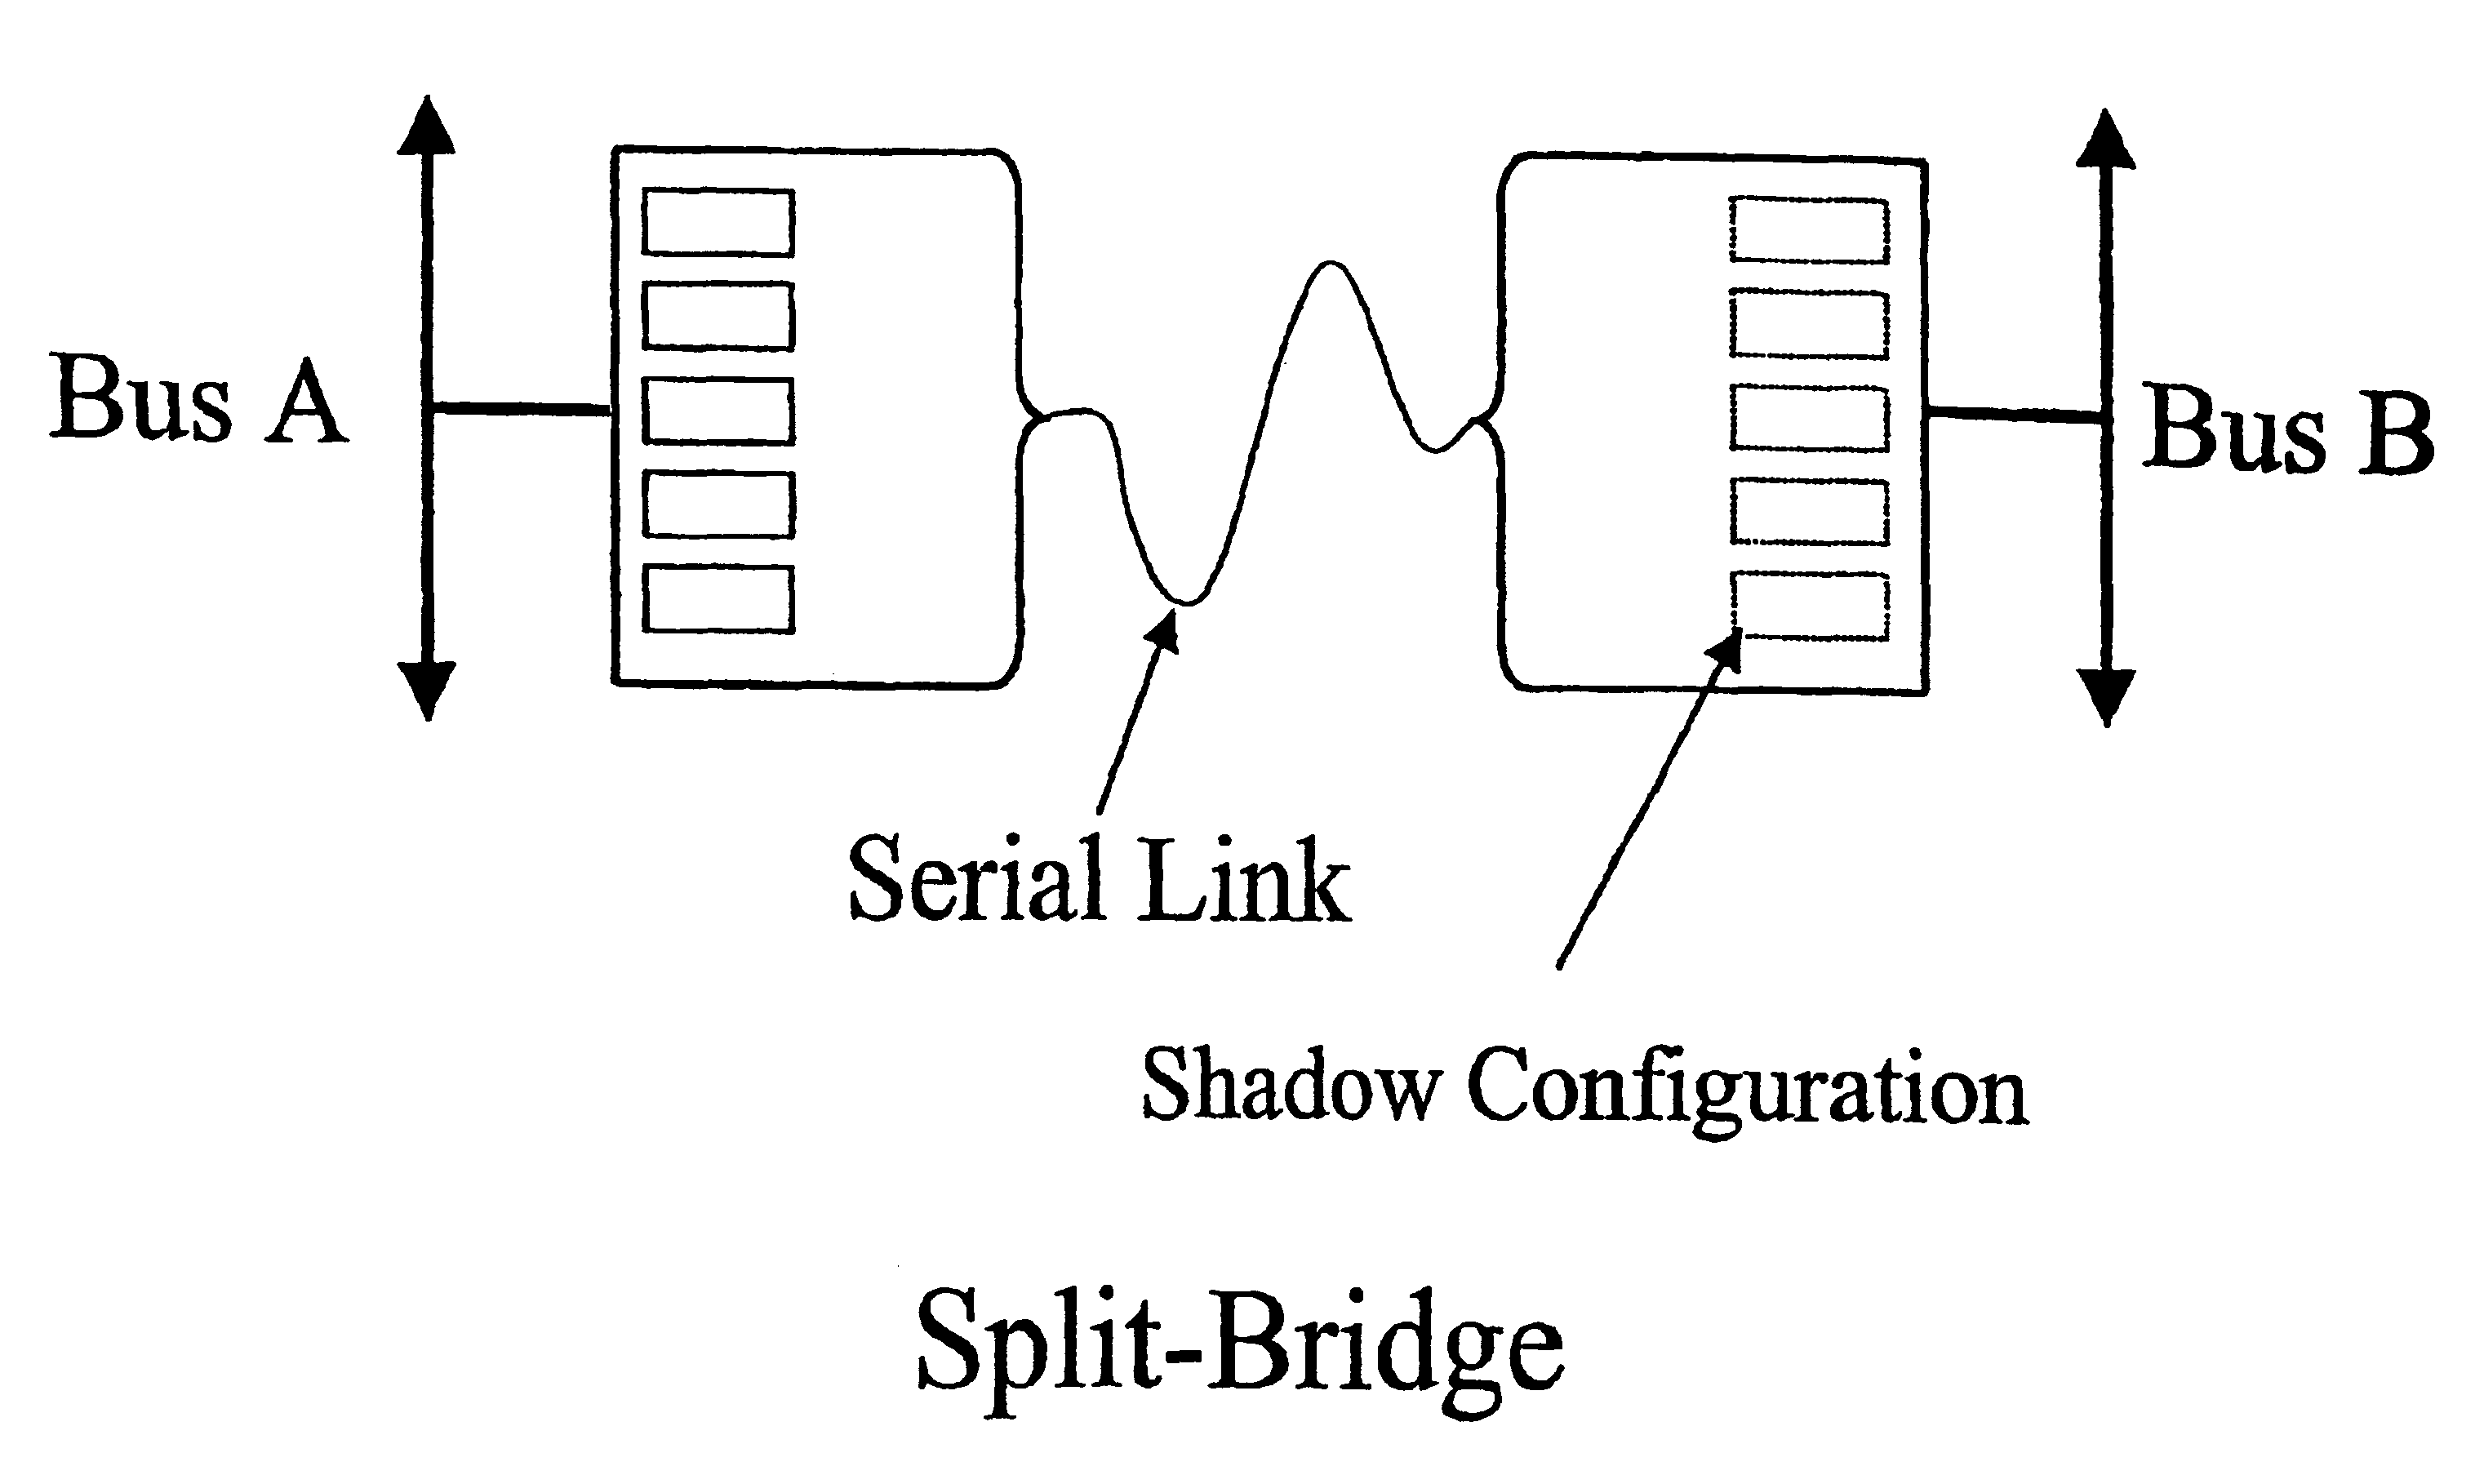 Extended cardbus/PC card controller with split-bridge technology